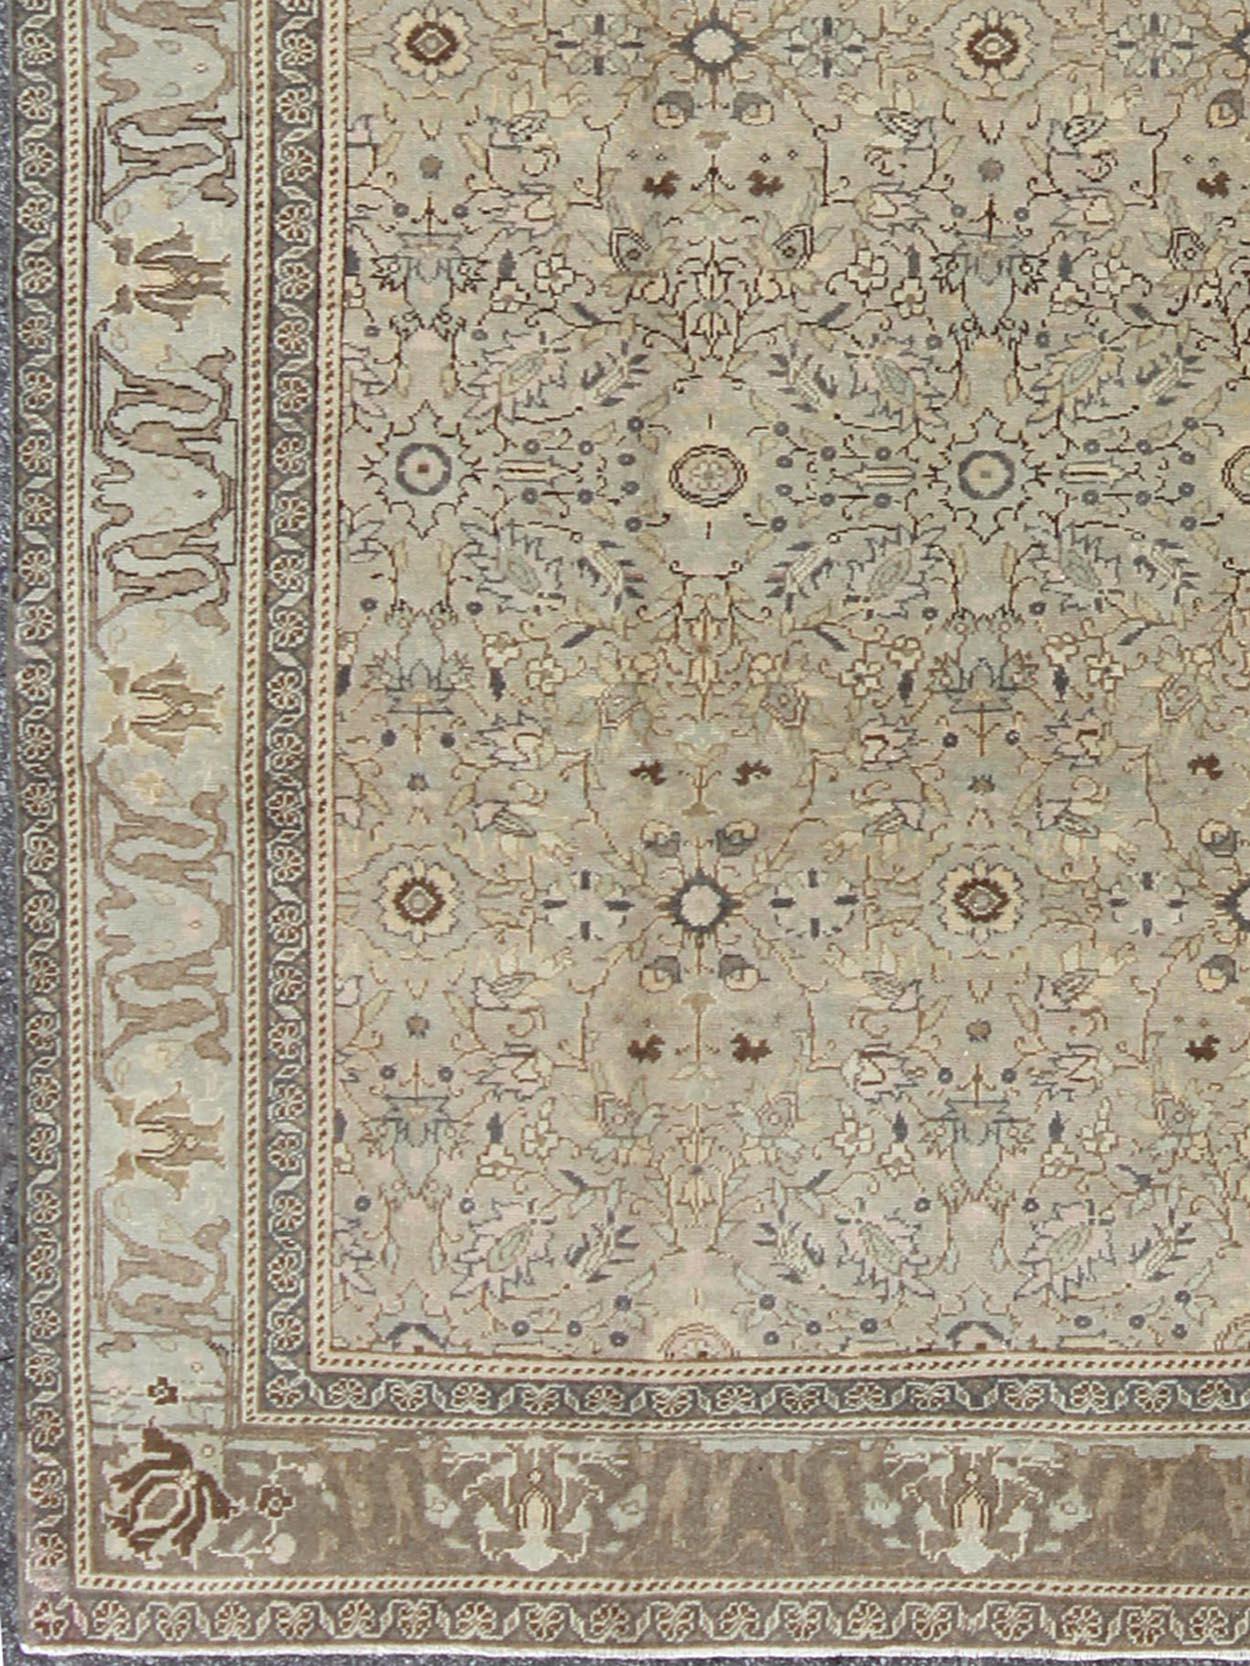 Measures: 5'9' x 8'2'

In this early 20th century Turkish Sivas antique rug, the sand field features a delicate trellis design of scrolling vinery and scattered fleuron within a spacious sand-colored palmette and fleuron border. These